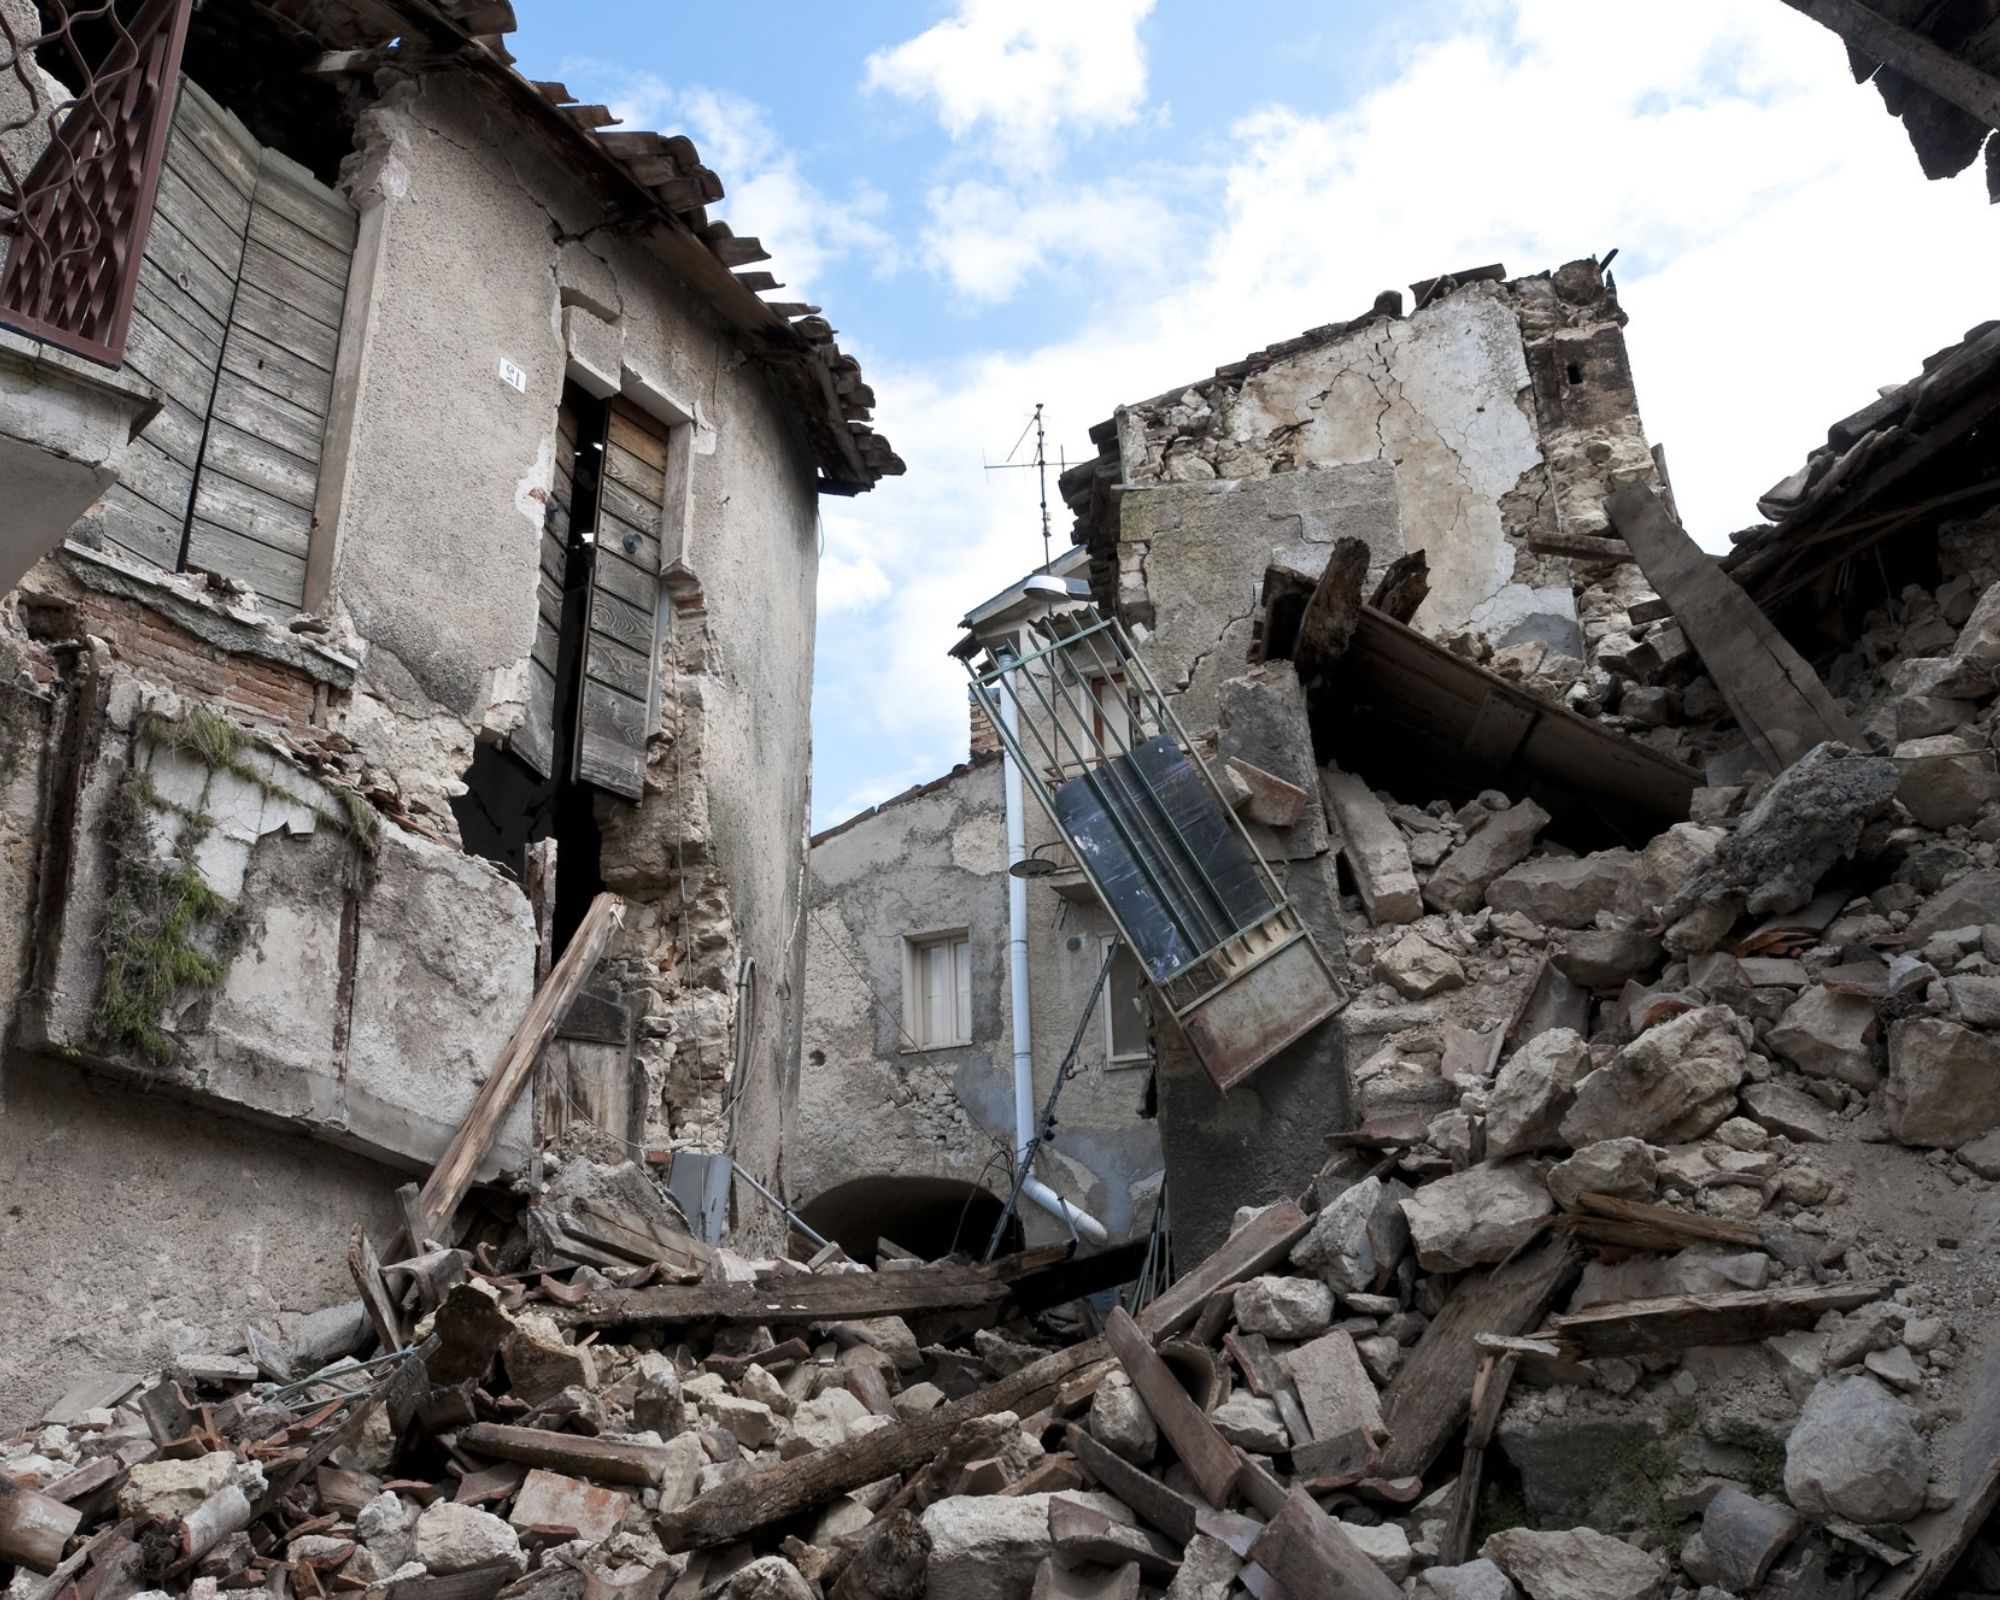 "Massive death and damage" caused by Russia in Ukraine